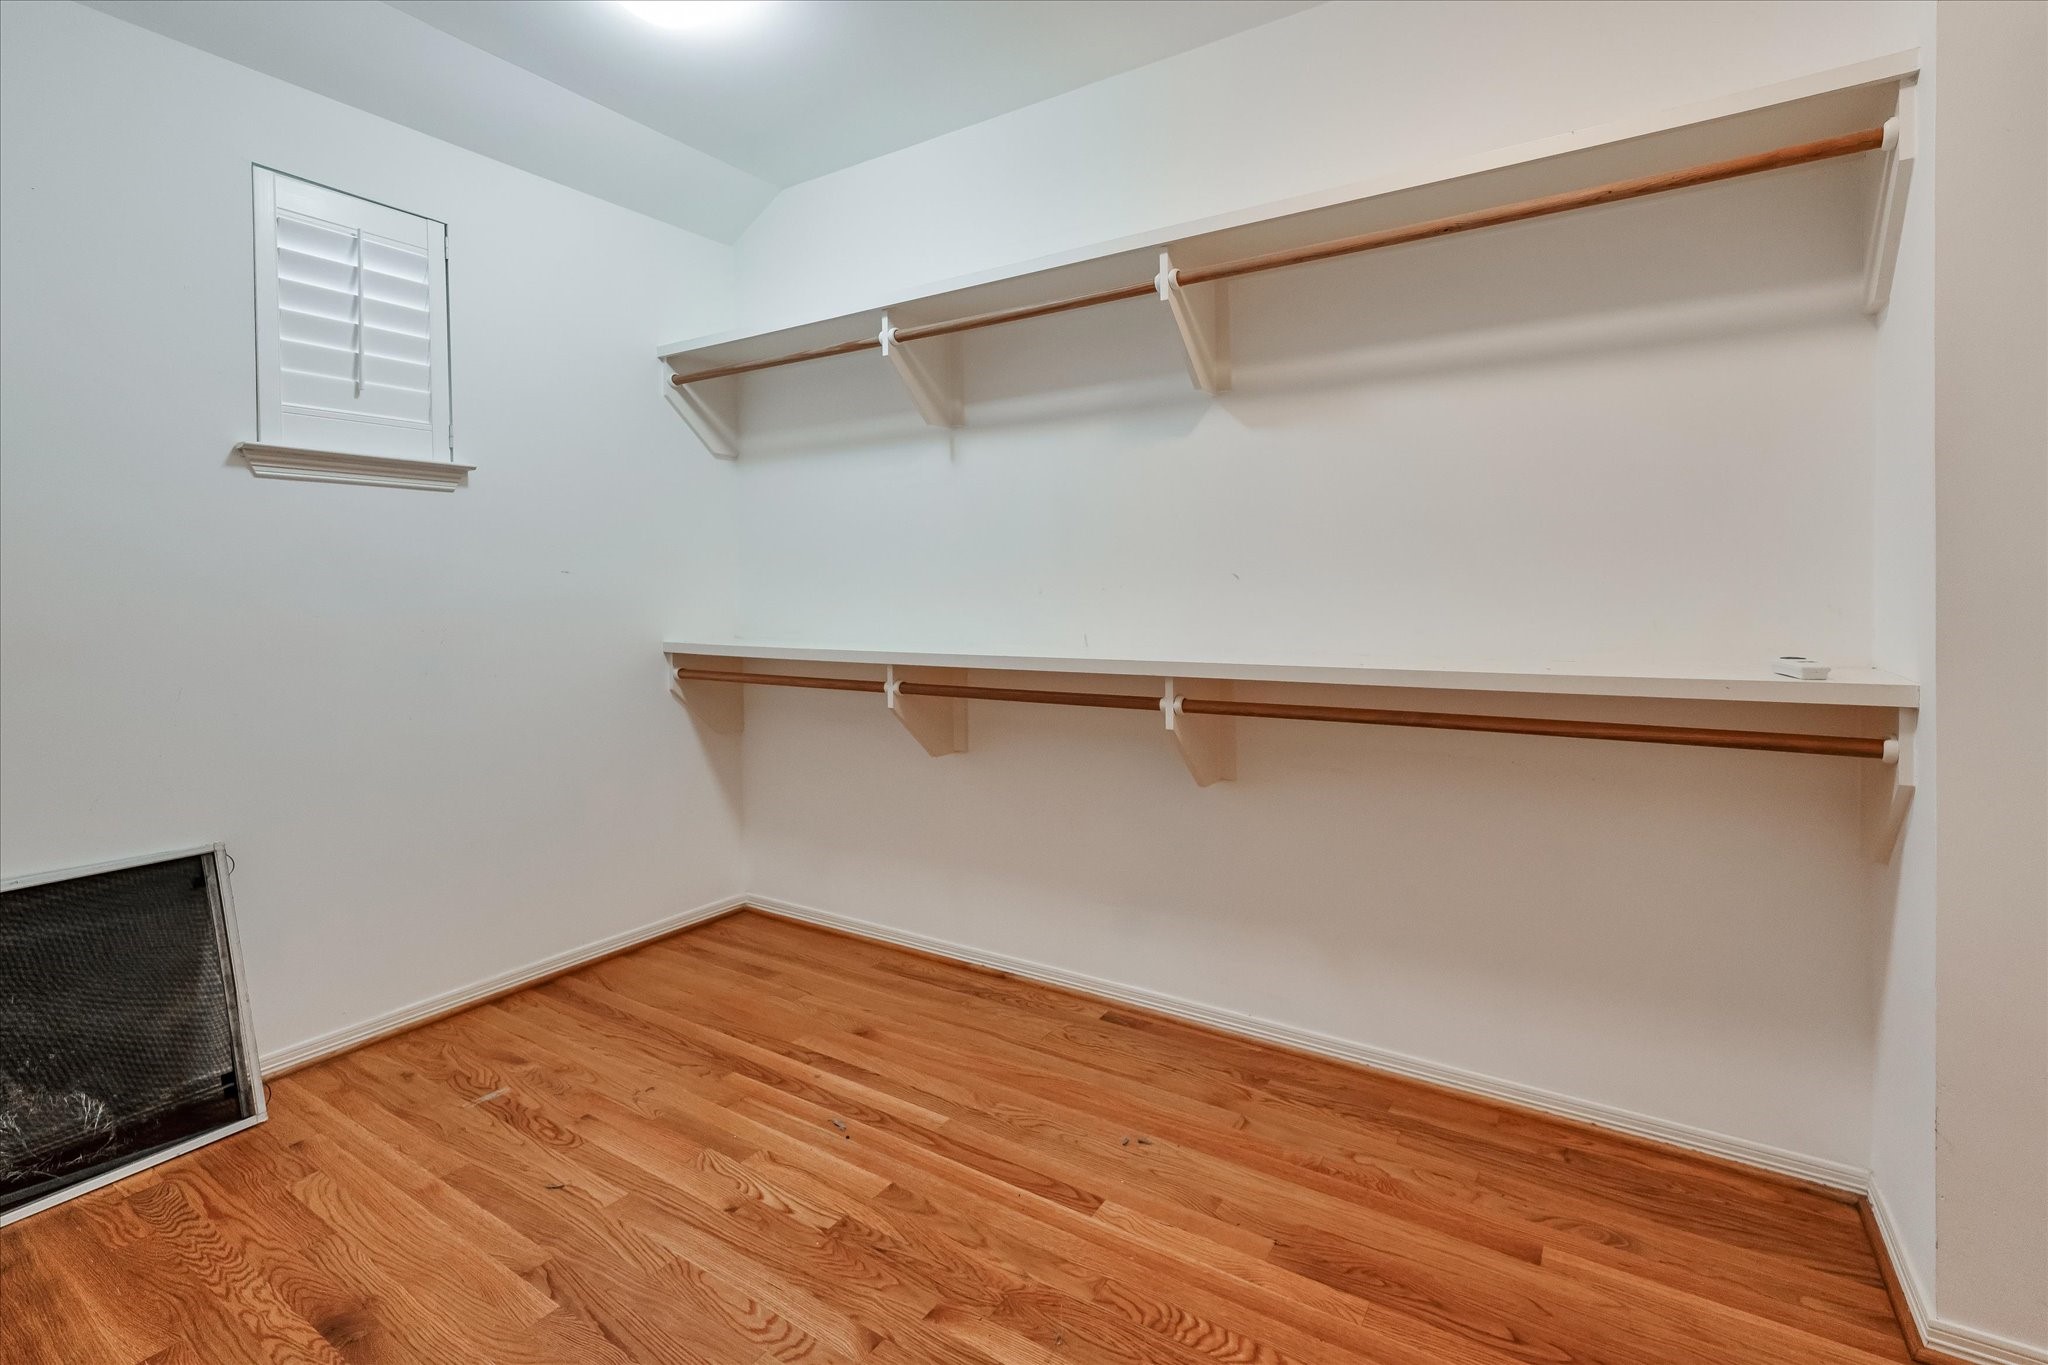 Take a look at your extra large primary walk-in closet equipped with plenty of hanging racks and shelving.